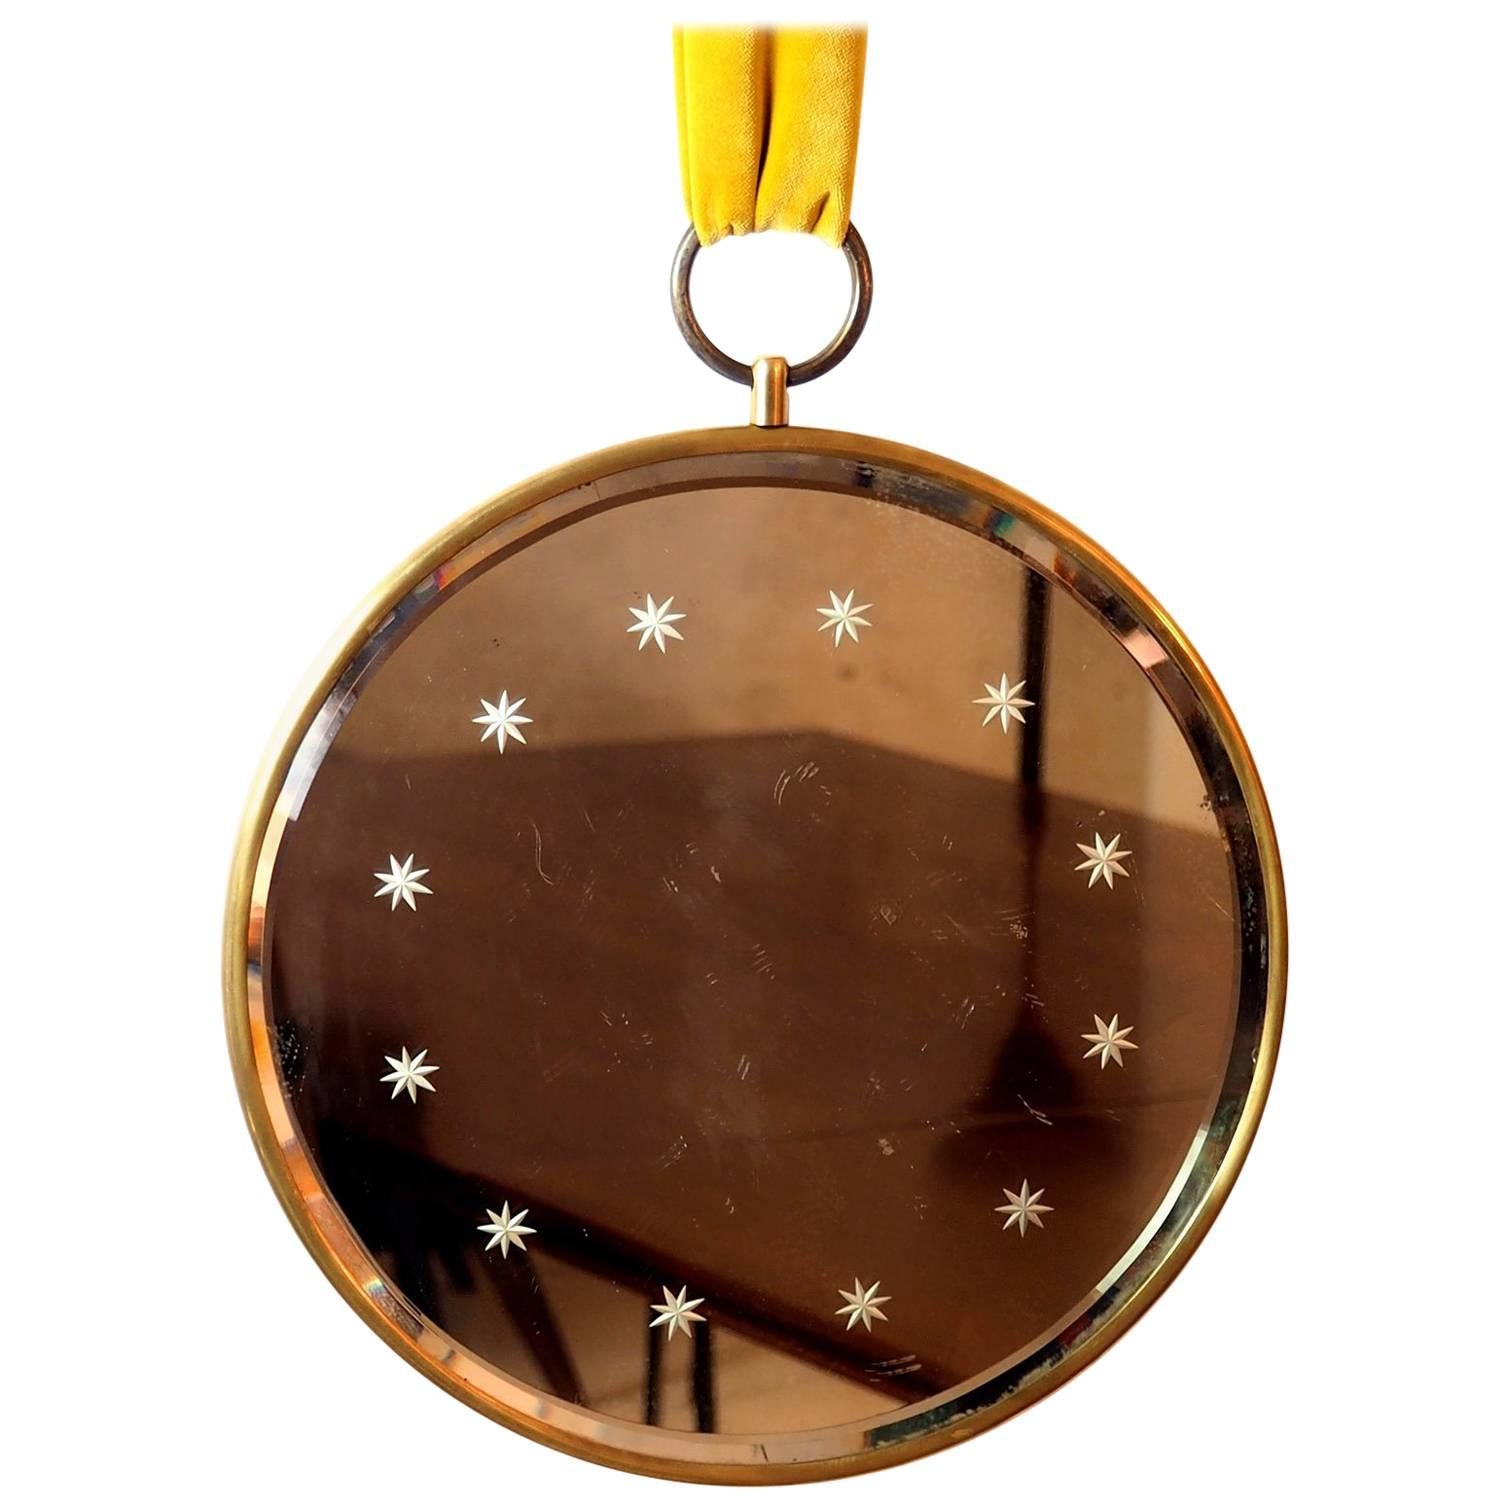 Fontana Arte Midcentury Wall Round Brass Mirror with Engraved Stars, Italy 1950s For Sale